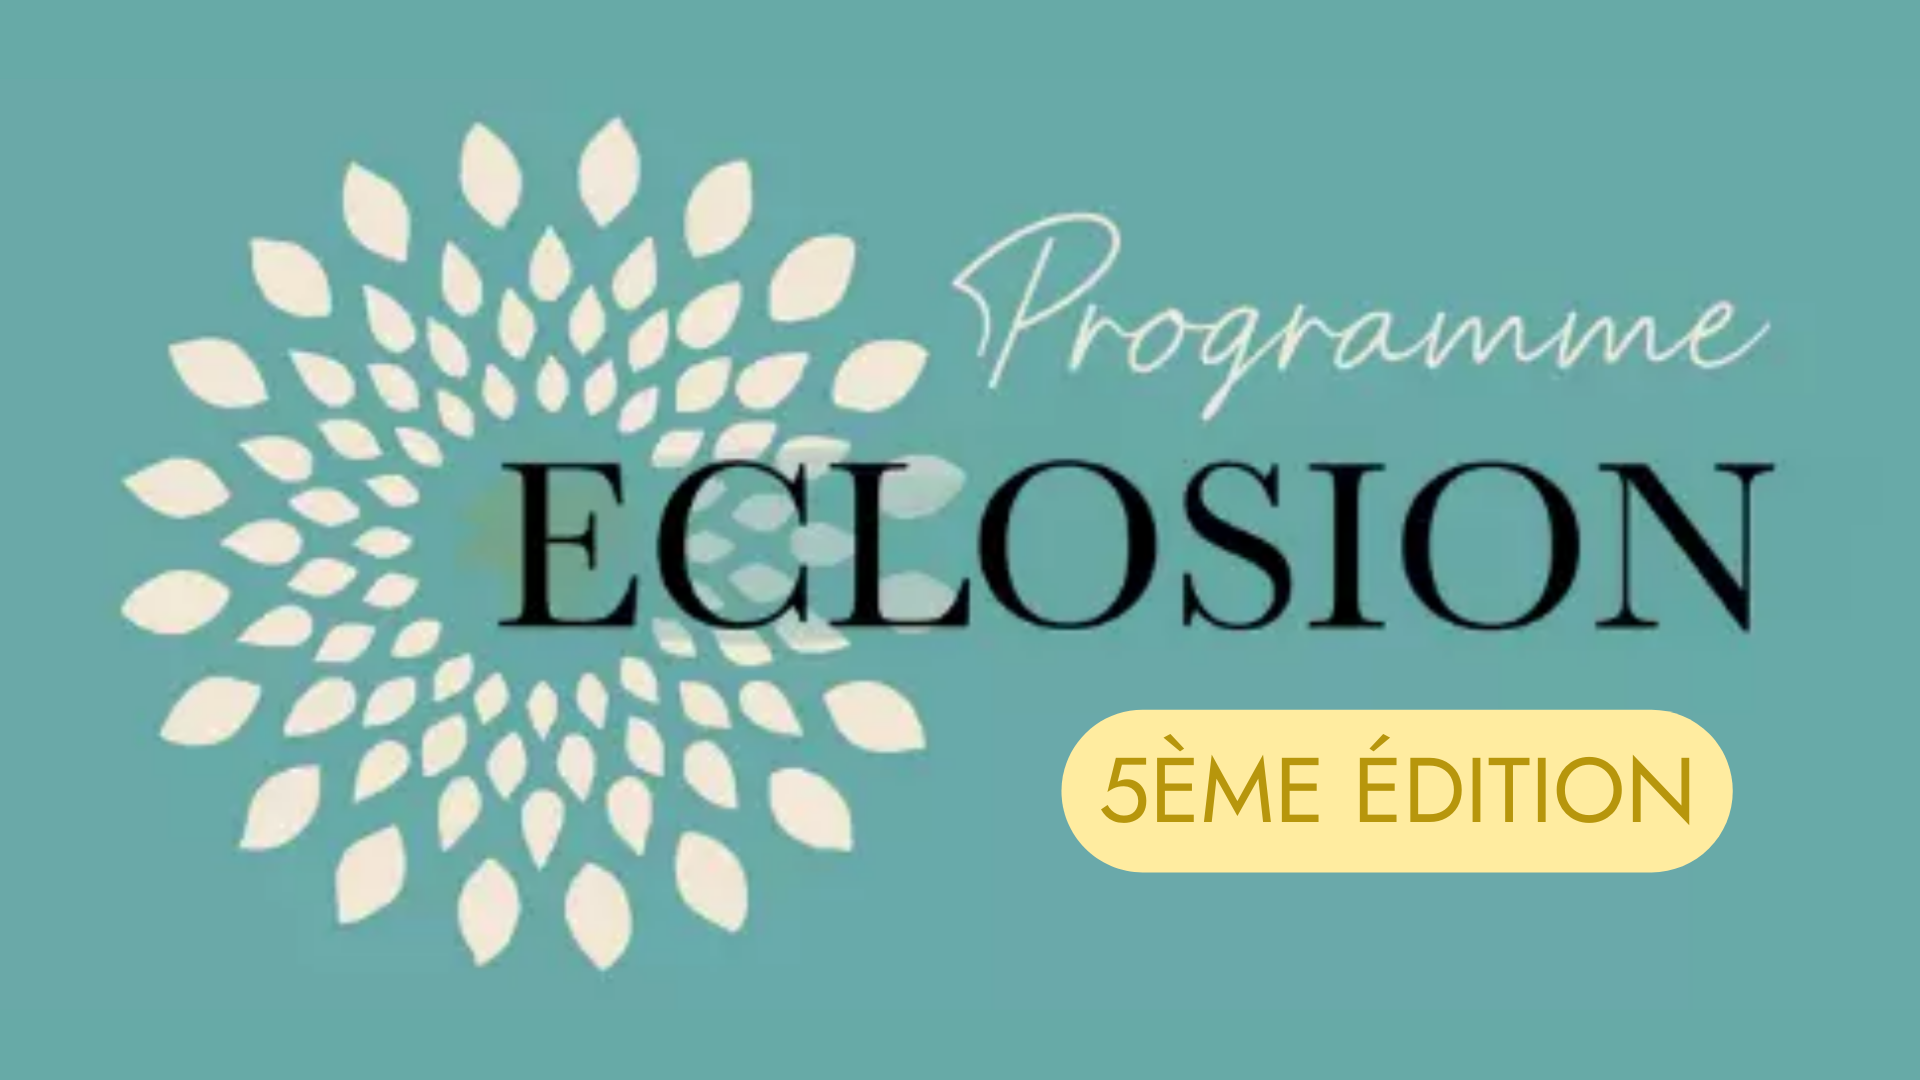 Programme Eclosion - Audrey Carsalade